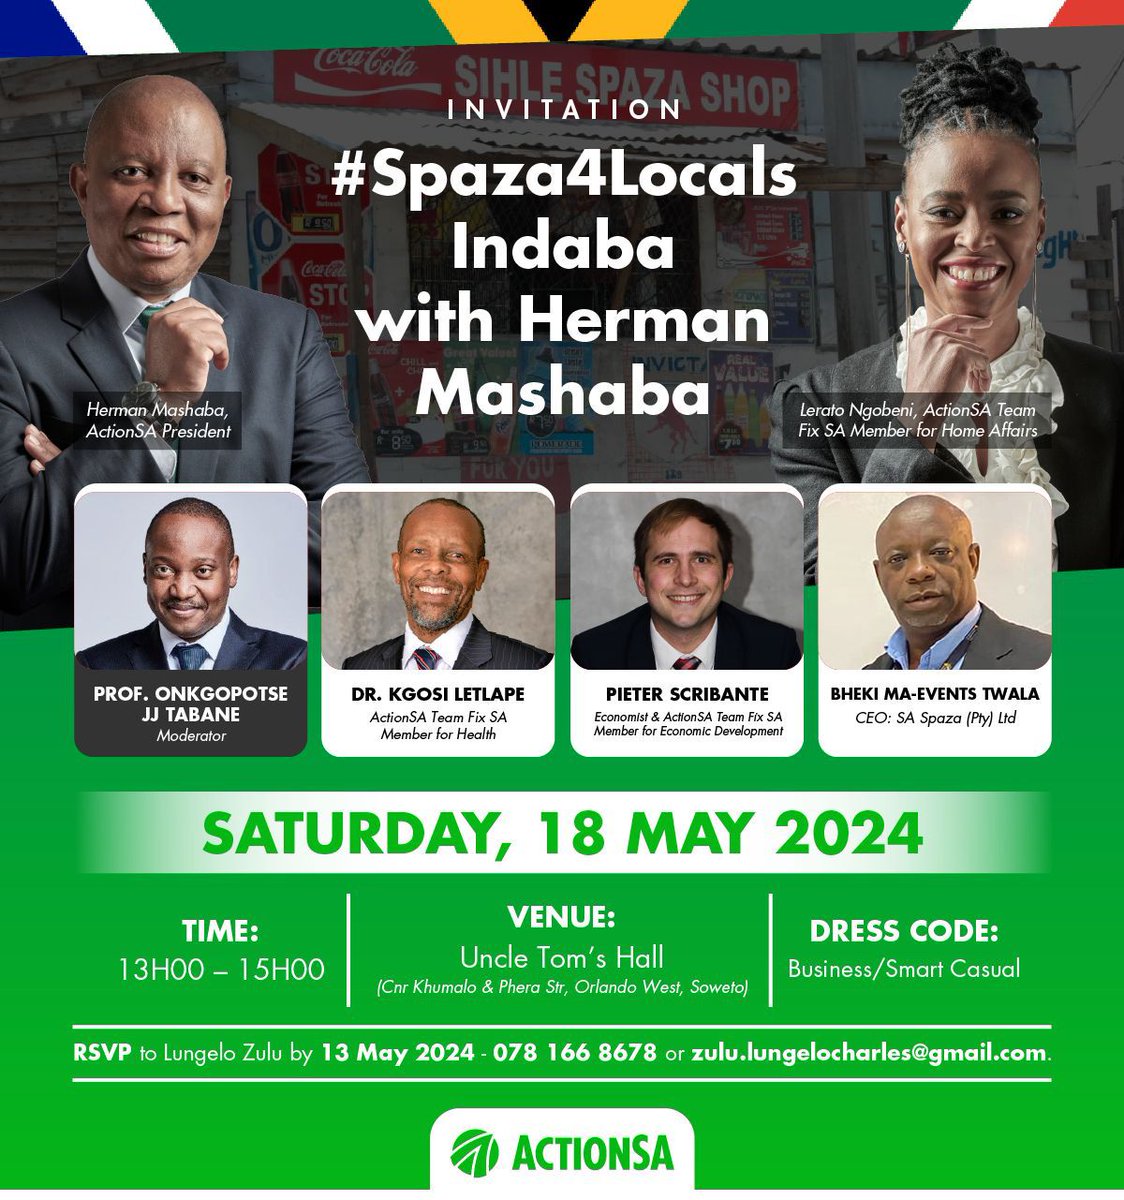 Calling all business owners to the #Spaza4Locals Indaba with Herman Mashaba at the Uncle Tom's Hall in Orlando West, Soweto. The event aims to engage , debate & interrogate ActionSA's offer to Fix our township Economy. PS: Participation doesn't equal a vote/ support for ActionSA